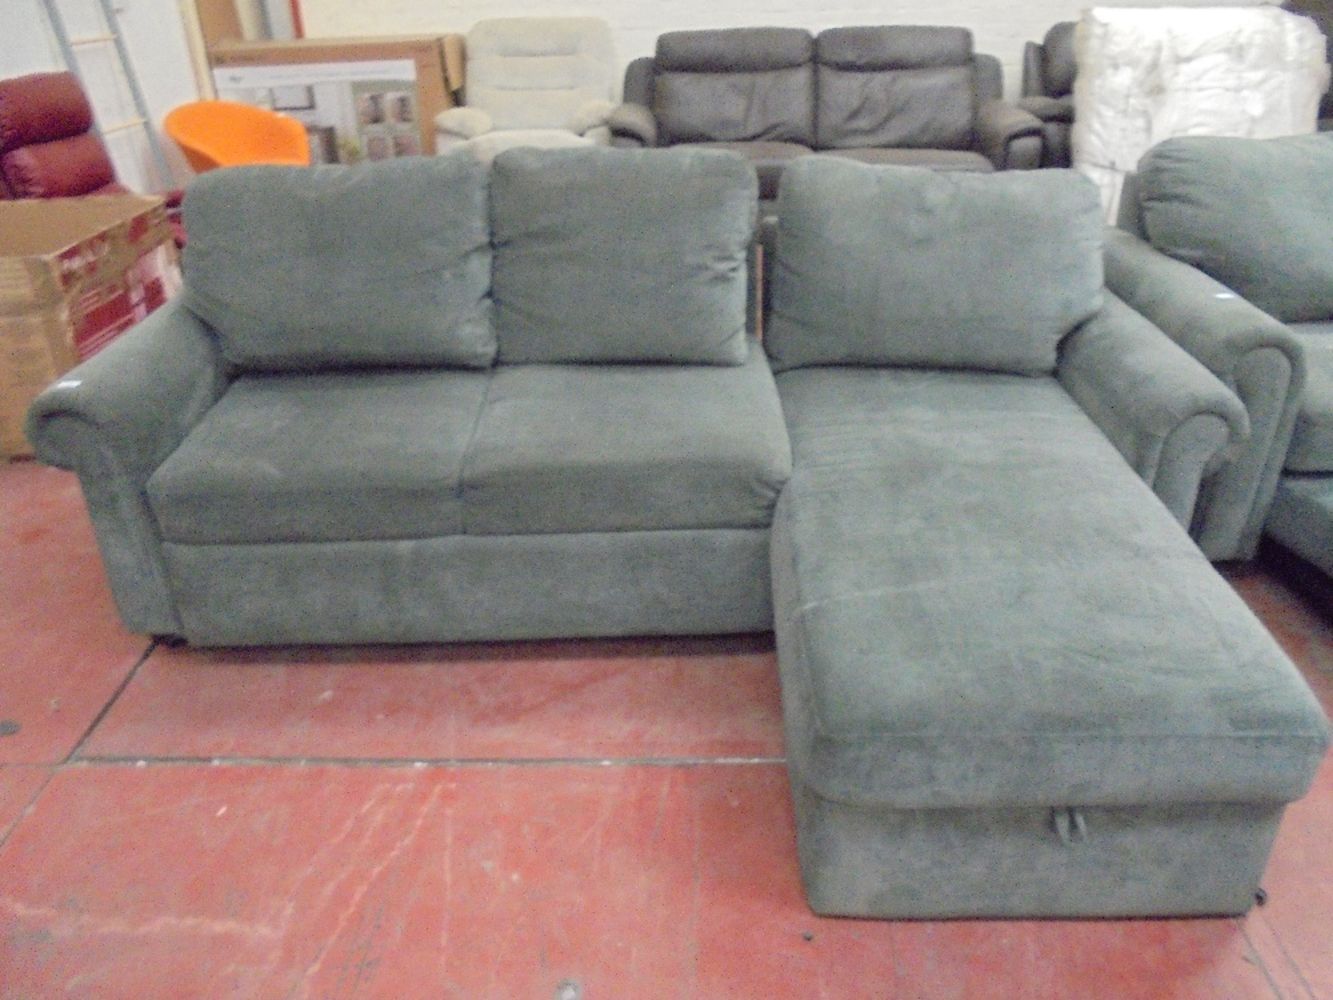 Auction of Costco Sofas and Chairs